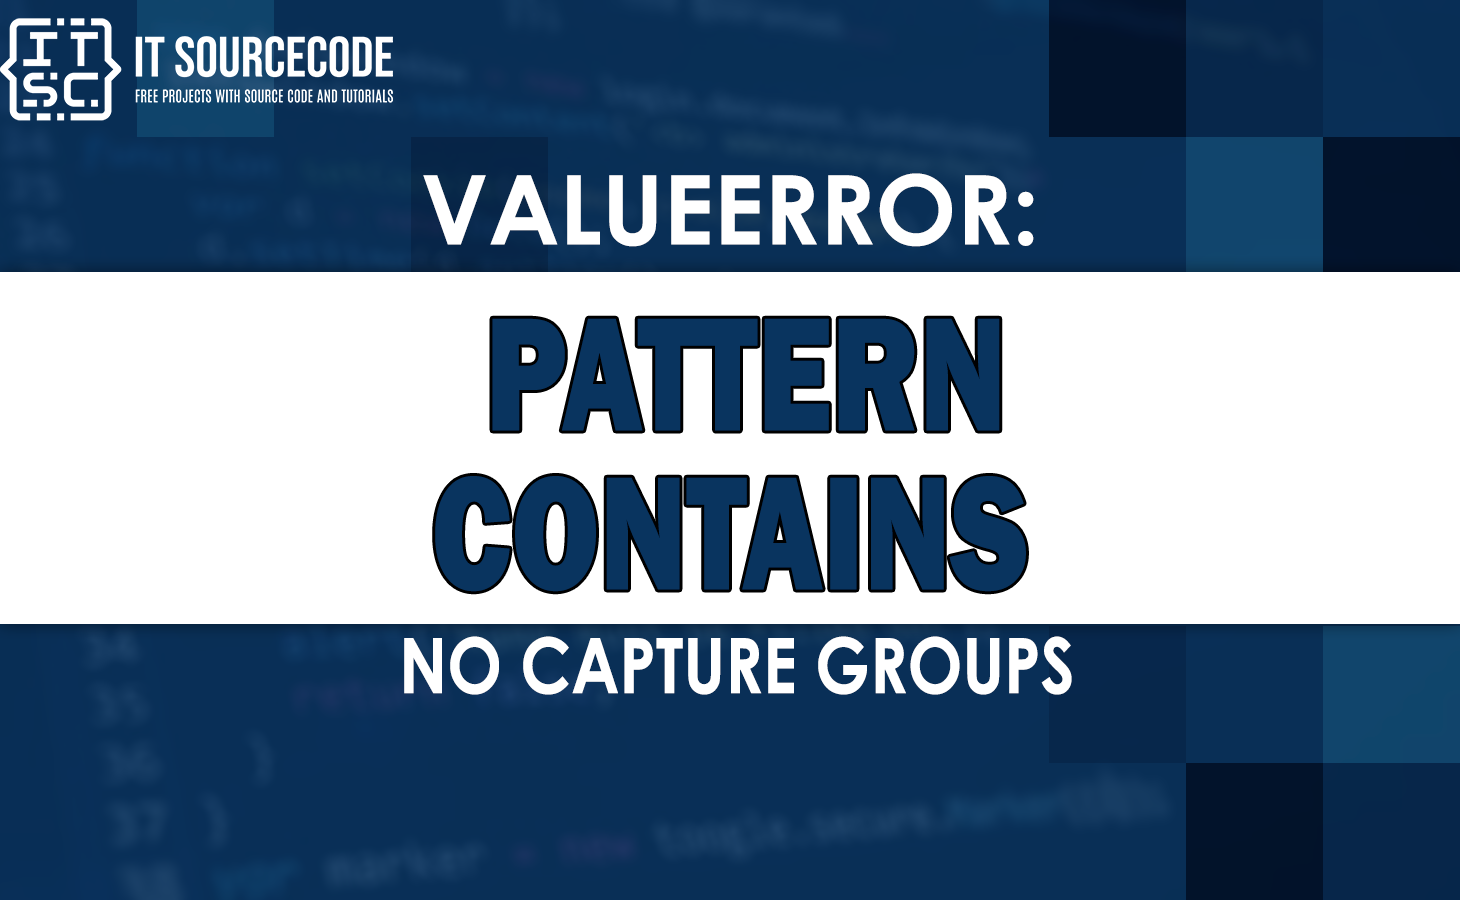 valueerror pattern contains no capture groups